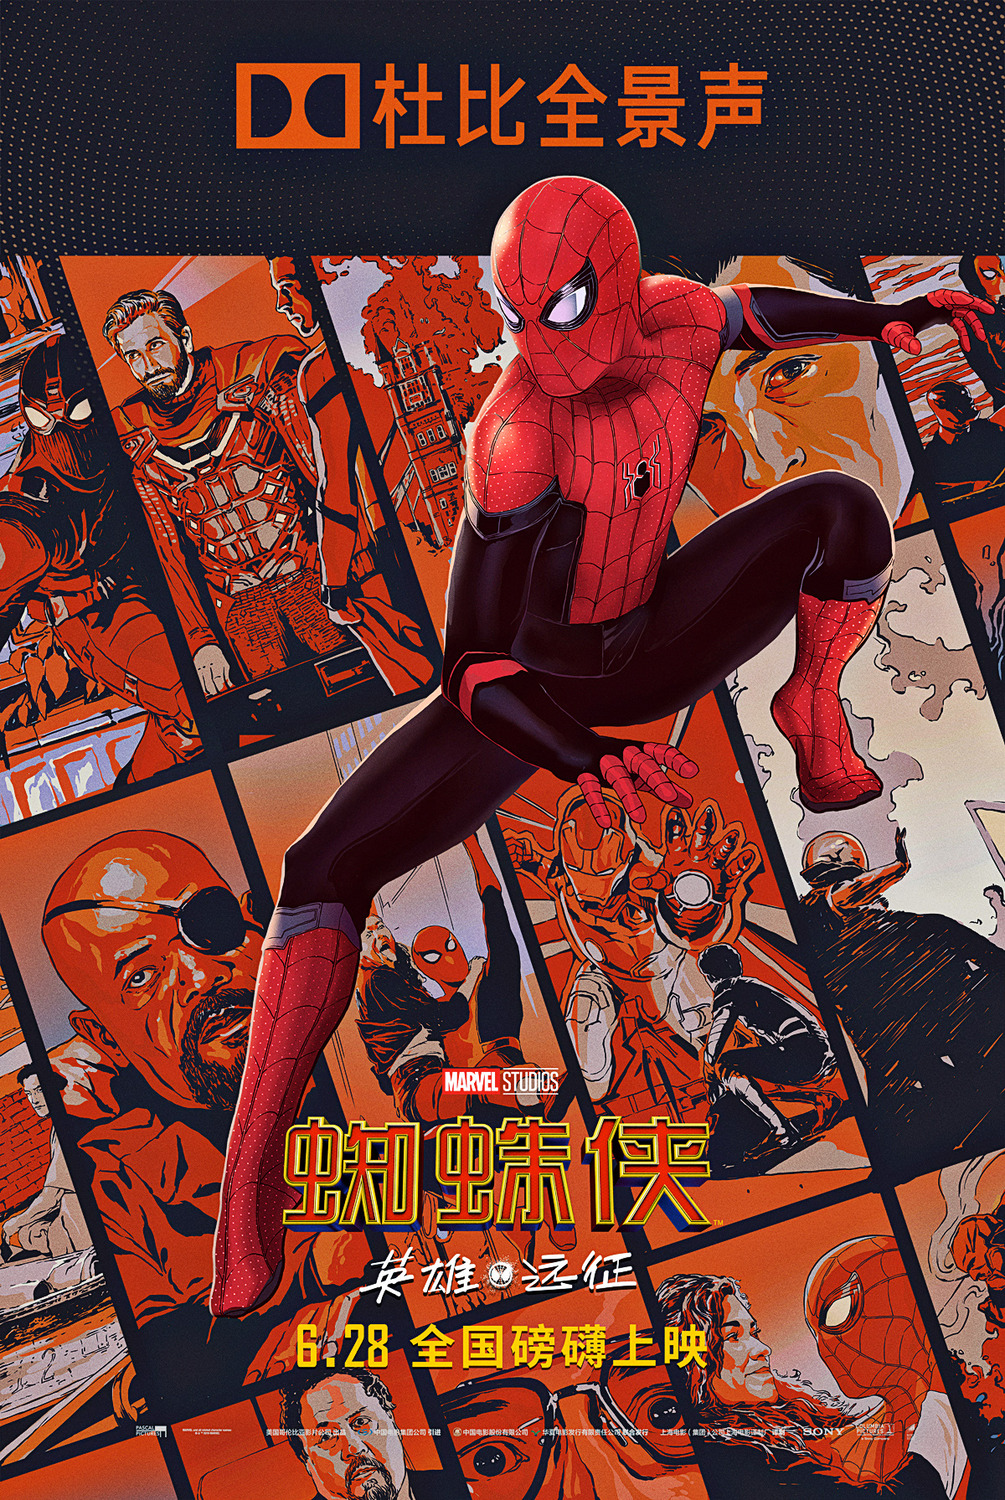 Extra Large Movie Poster Image for Spider-Man: Far From Home (#34 of 35)